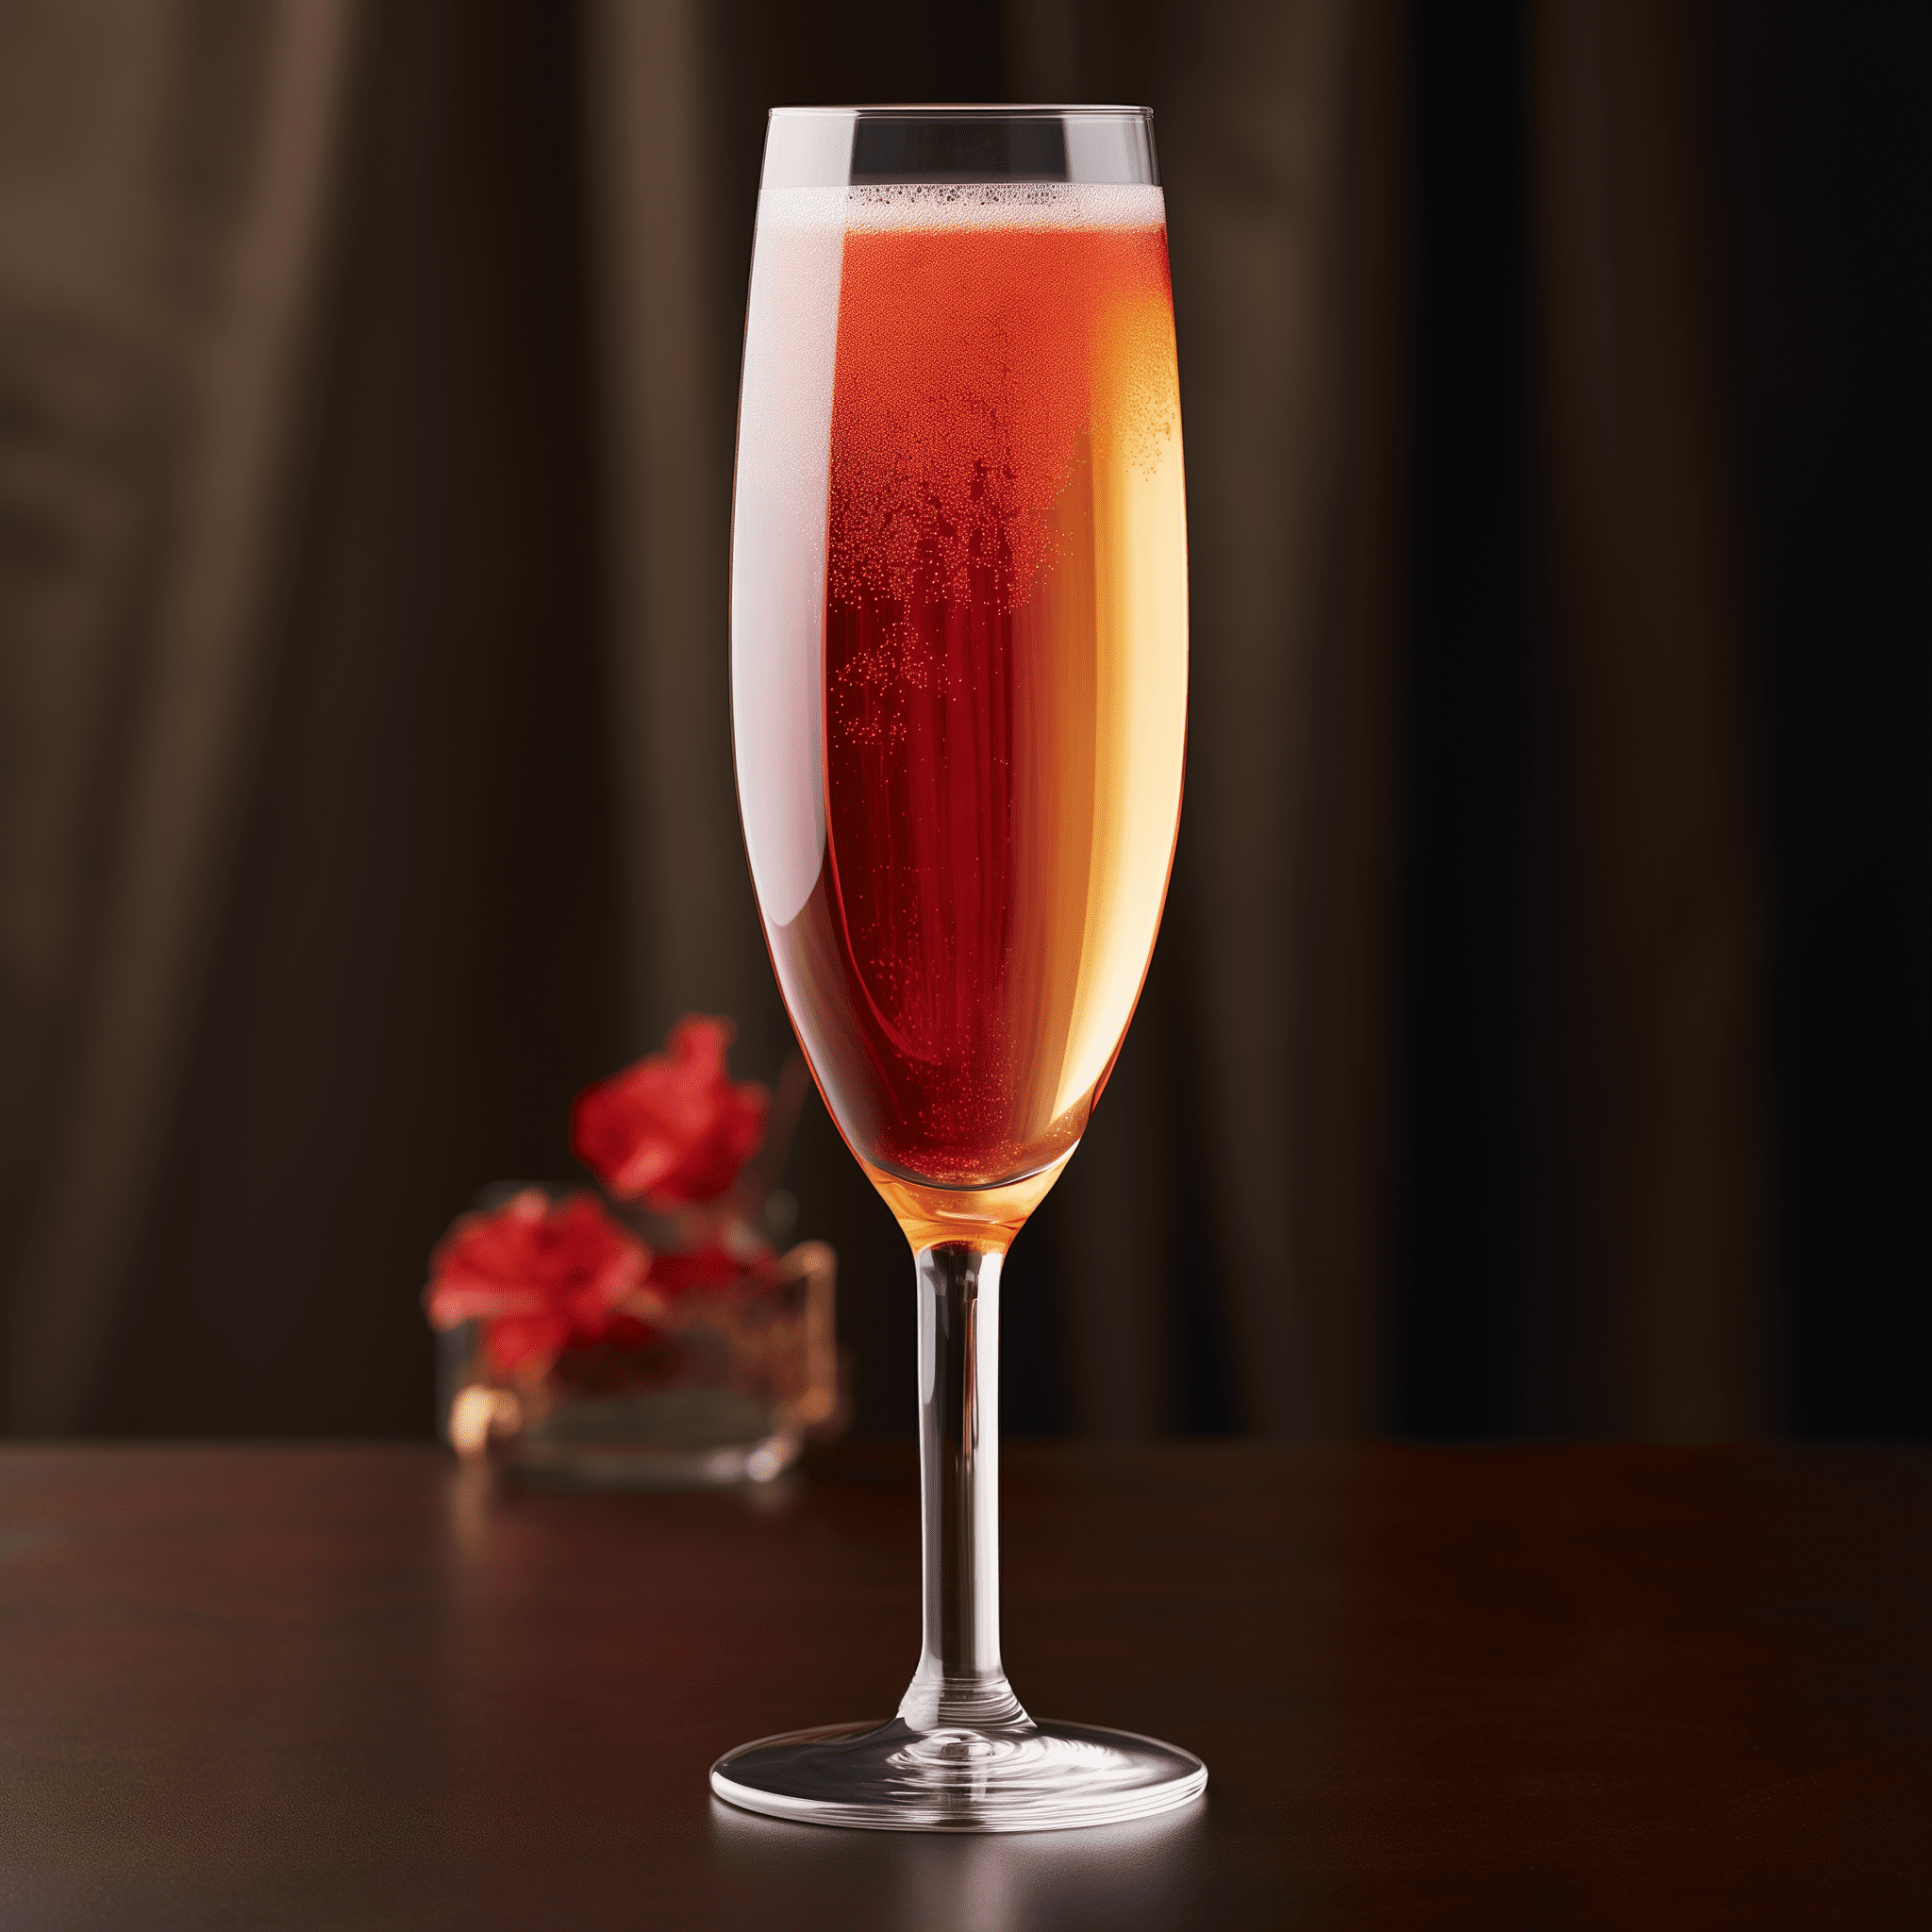 Goodnight Kiss Cocktail Recipe - The Goodnight Kiss is a harmonious blend of sweet and bitter, with the effervescence of Champagne lifting the spirits. The sugar cube adds a subtle sweetness that balances the herbal bitterness of the Angostura and the distinct bitter-sweet profile of Campari.